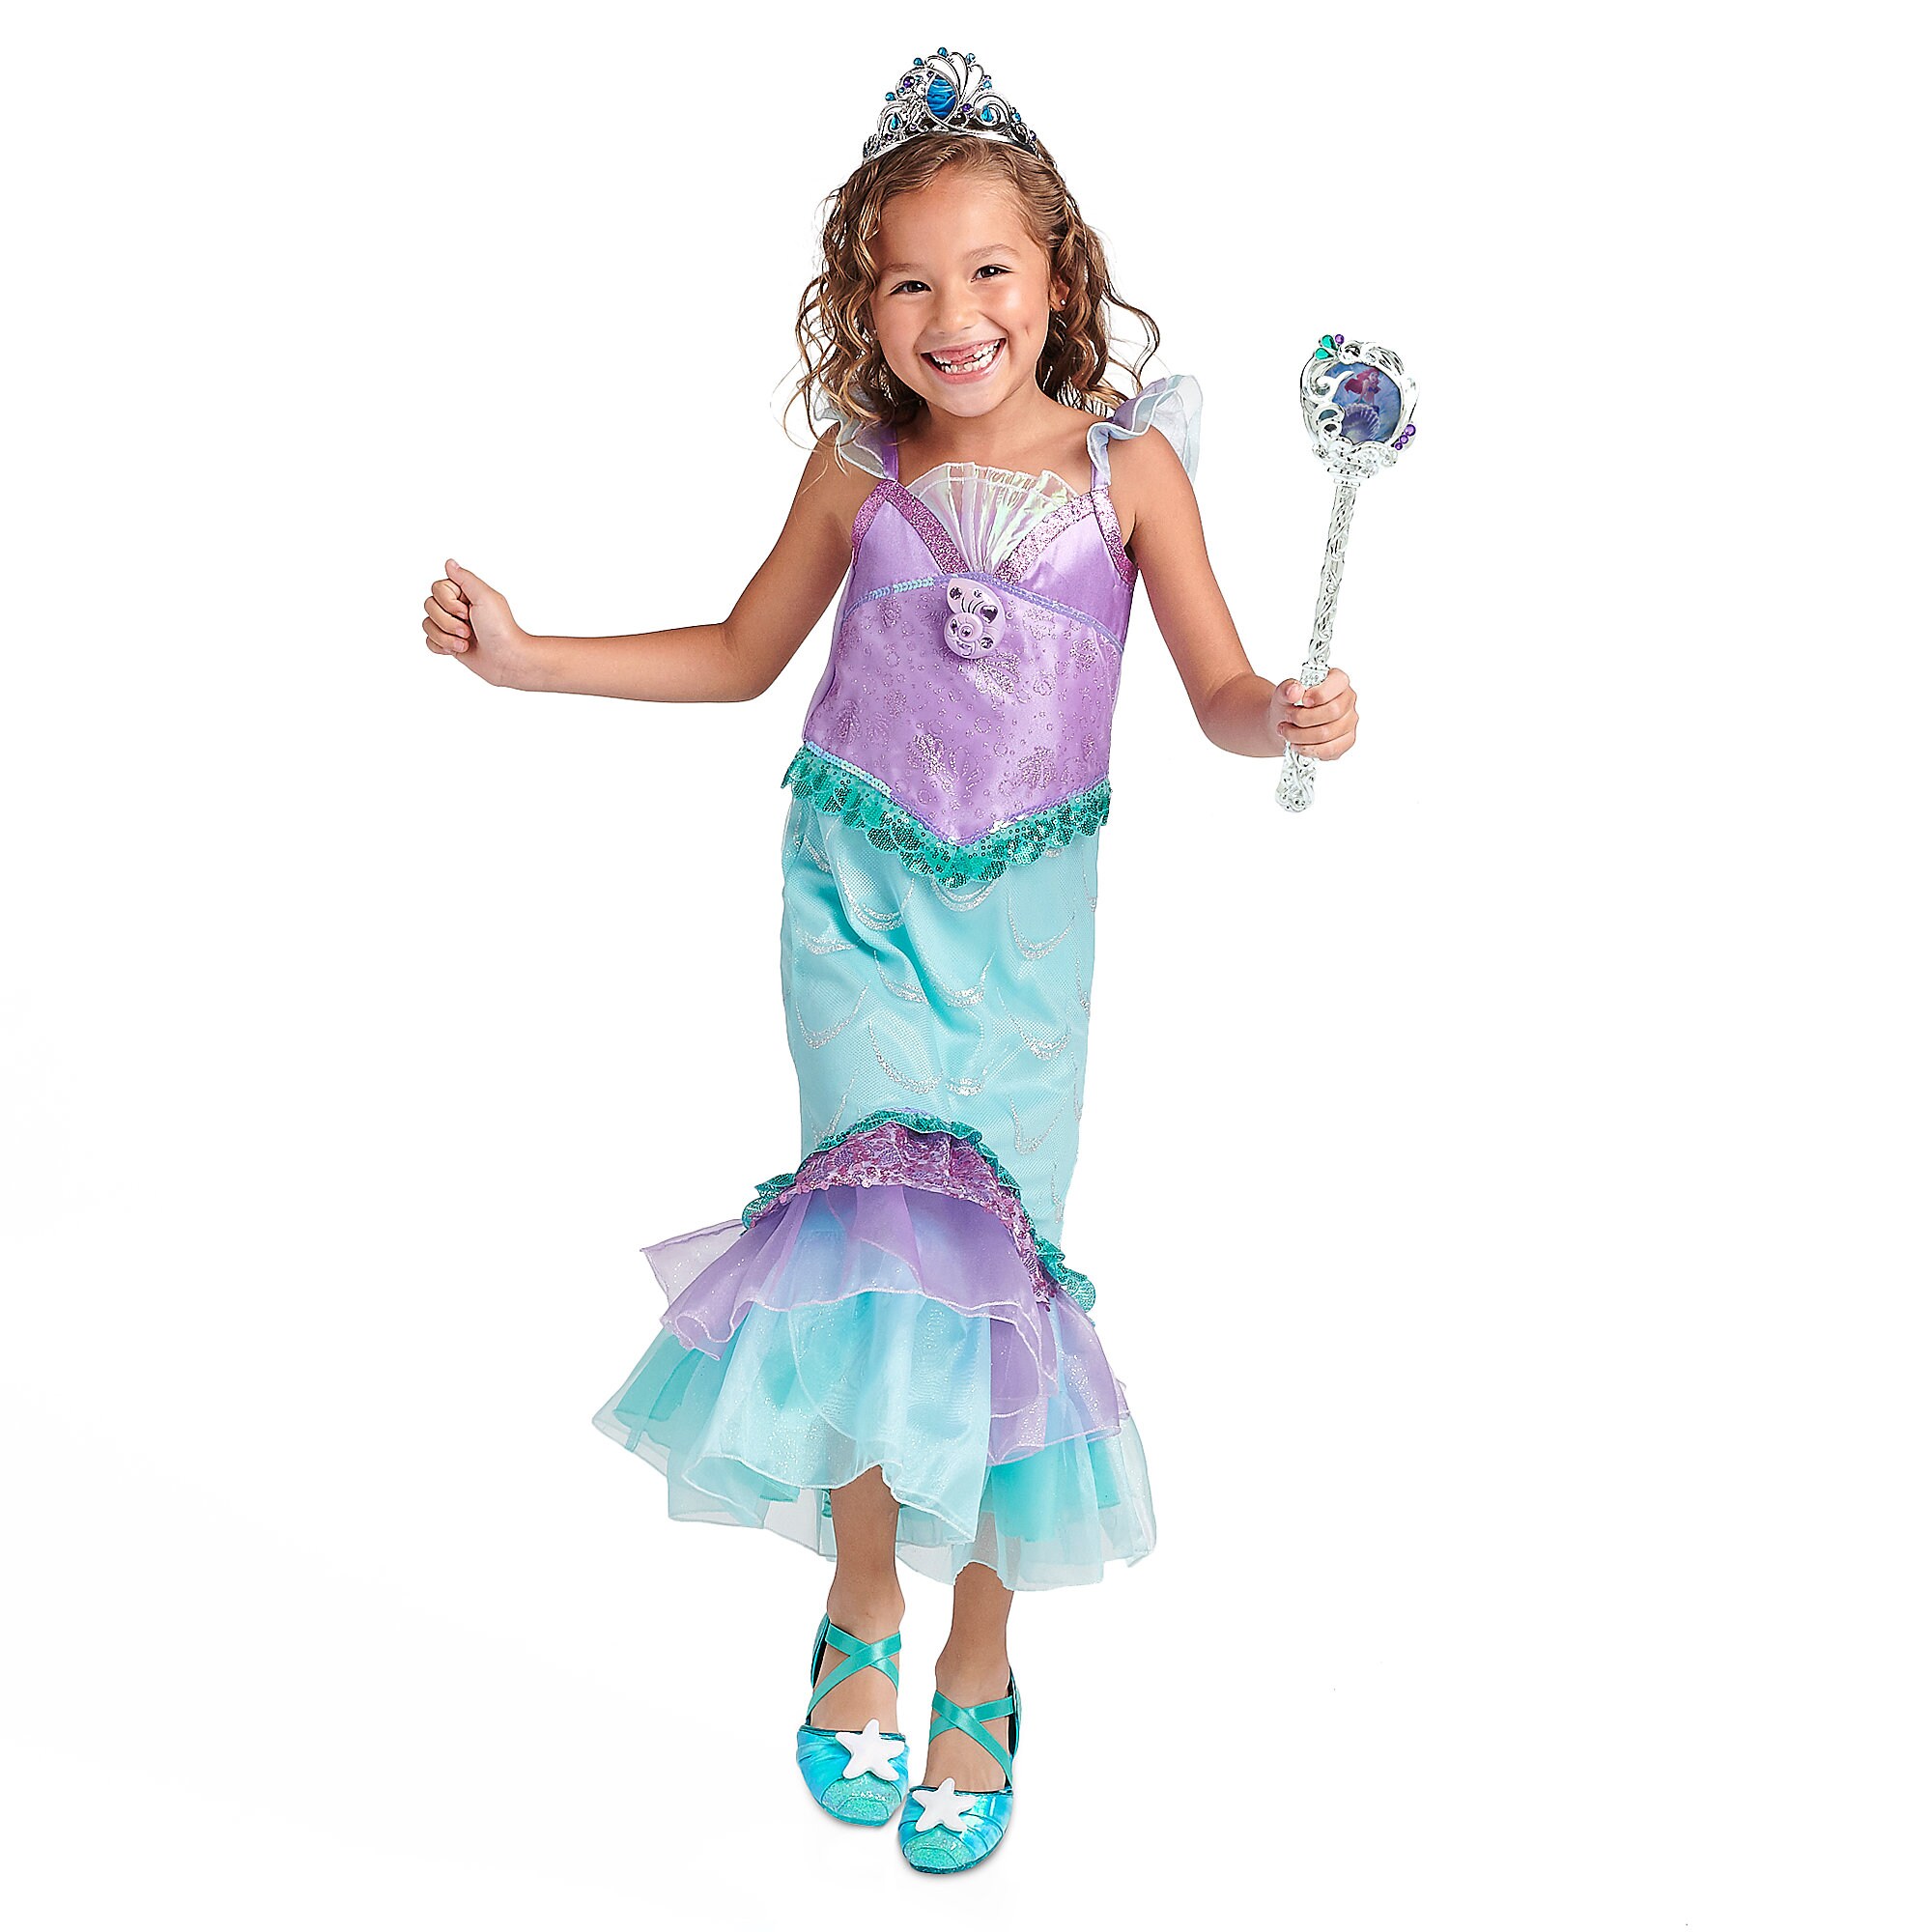 Ariel Costume with Sound for Kids